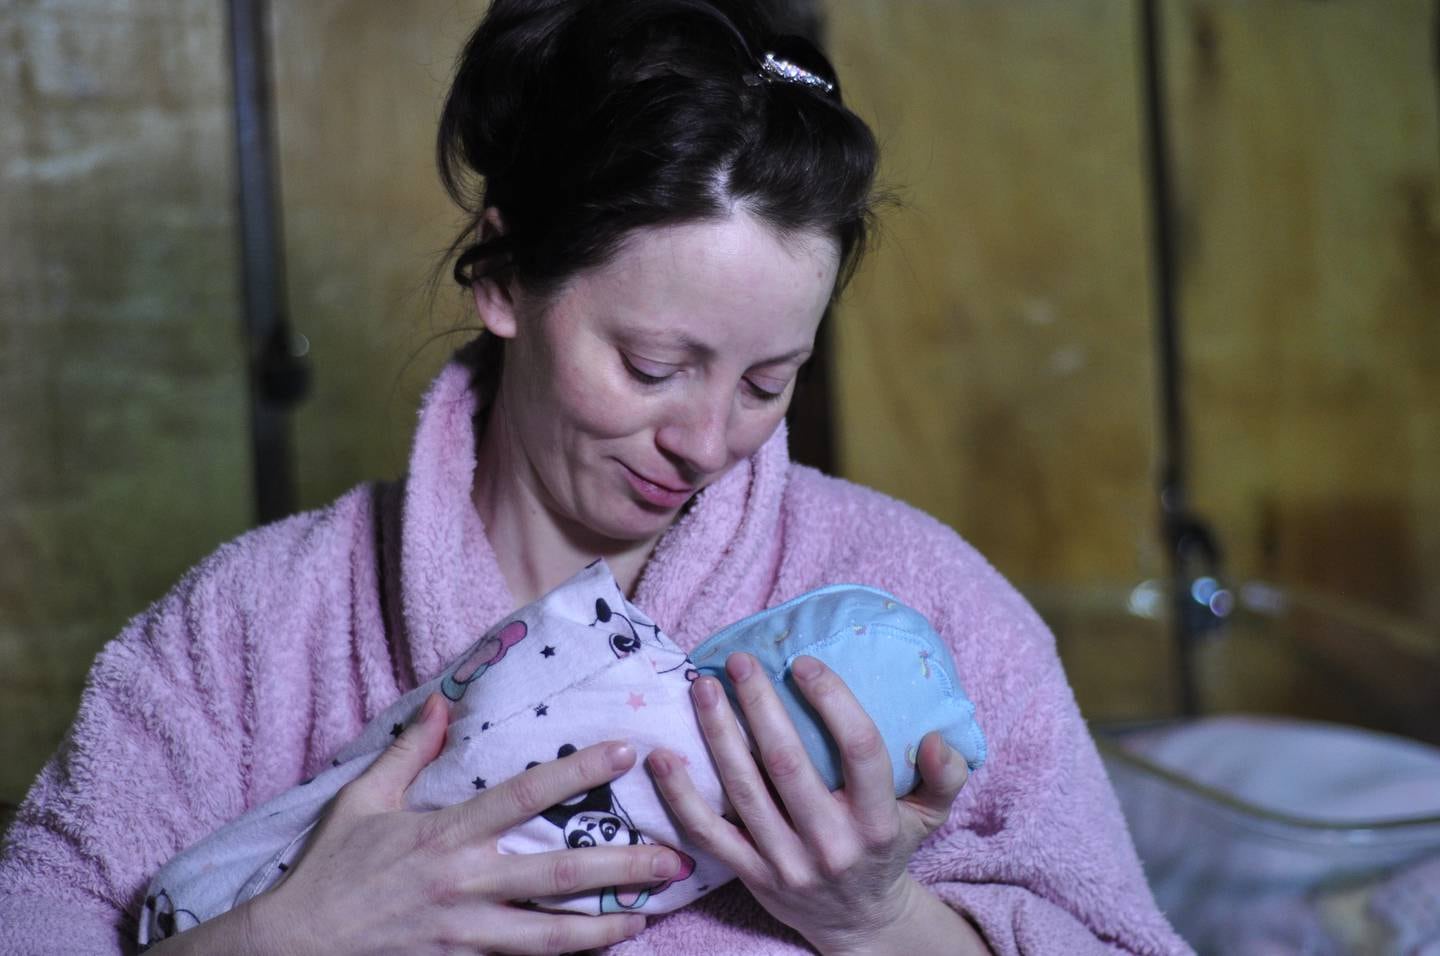 On 7 March 2022 at Kyiv Regional Perinatal Centre in Ukraine, Yuliya, 38, holds her newborn baby, Vera, siting on a bed in the makeshift ward in the Centre's basement, days after giving birth. “We’re sitting here in the basement, we’ve been crying,” Yuliya says. “It’s terrifying to see smoke and shelling. We’re doing everything we can to save our children, our futures.” It took Yuliya two days on foot to travel here from her home outside Kyiv. With the conflict escalating, Yuliya had no choice but to try to find a safe place to deliver her child. She says there were times during the journey when she worried she might not make it here at all. “I had to travel across fields and through forests,” she says, adding that due to some other health issues, not every facility would have been able to help her deliver her child. “But thanks to God and the doctors, I now have a baby and I’m still alive.” Tearfully, she says, “I just want us all to stay alive ... I want peace.”

In partnership with the Kyiv City Administration, UNICEF is providing urgent medical equipment, hygiene products and supplies to maternity hospitals and children’s hospitals all over Kyiv, including the Kyiv Regional Perinatal Centre. 

The basement of the centre has been turned into a makeshift maternity ward. Most of the women here only leave the basement when they need to – when they need to wash or get something to eat. Nataliya Heynts, the centre director, says the situation has been catastrophic for families. “It’s impossible to be prepared for this,” she says. “It’s extremely cold, dark, and there are no plugs down here.” Medical staff work under extreme pressure, delivering children amid constant shelling and often without a stable power supply. Some staff have already fled with their families. Others, including Nataliya, are taking on multiple jobs at once. “I work as a cook, a doctor and an operating surgeon,” says Nataliya. “It is our respon